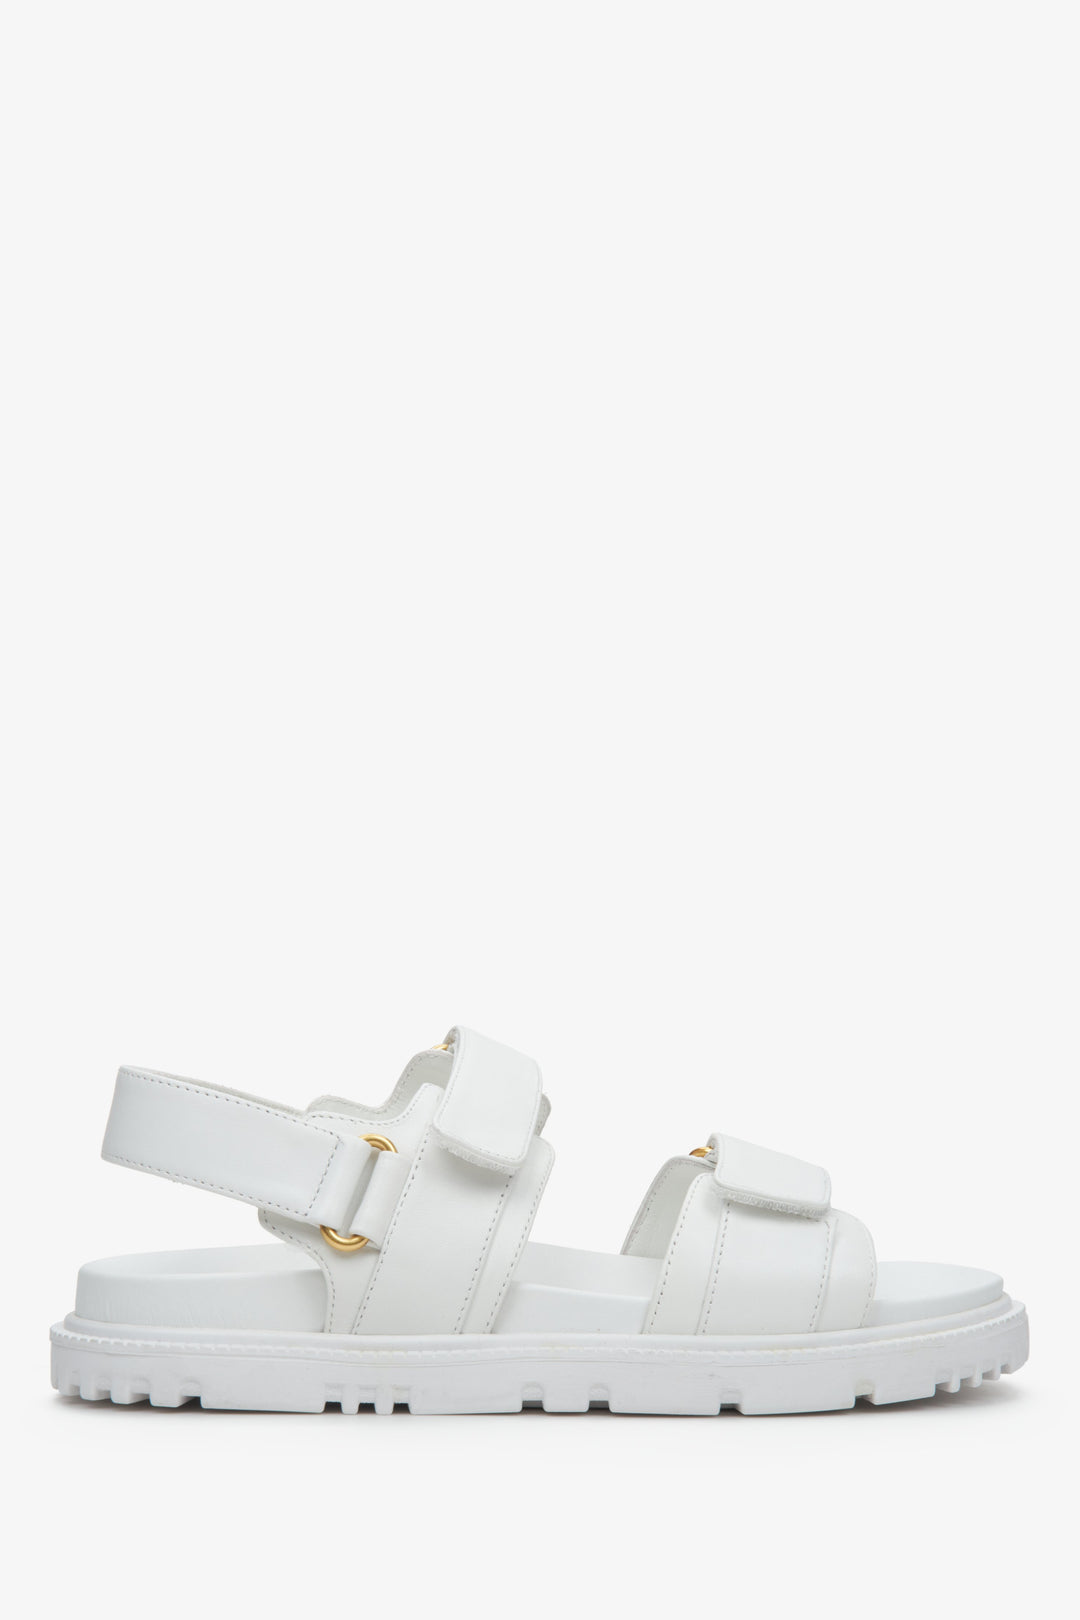 Women's White Leather Sandals with a Soft Sole Estro ER00113312.